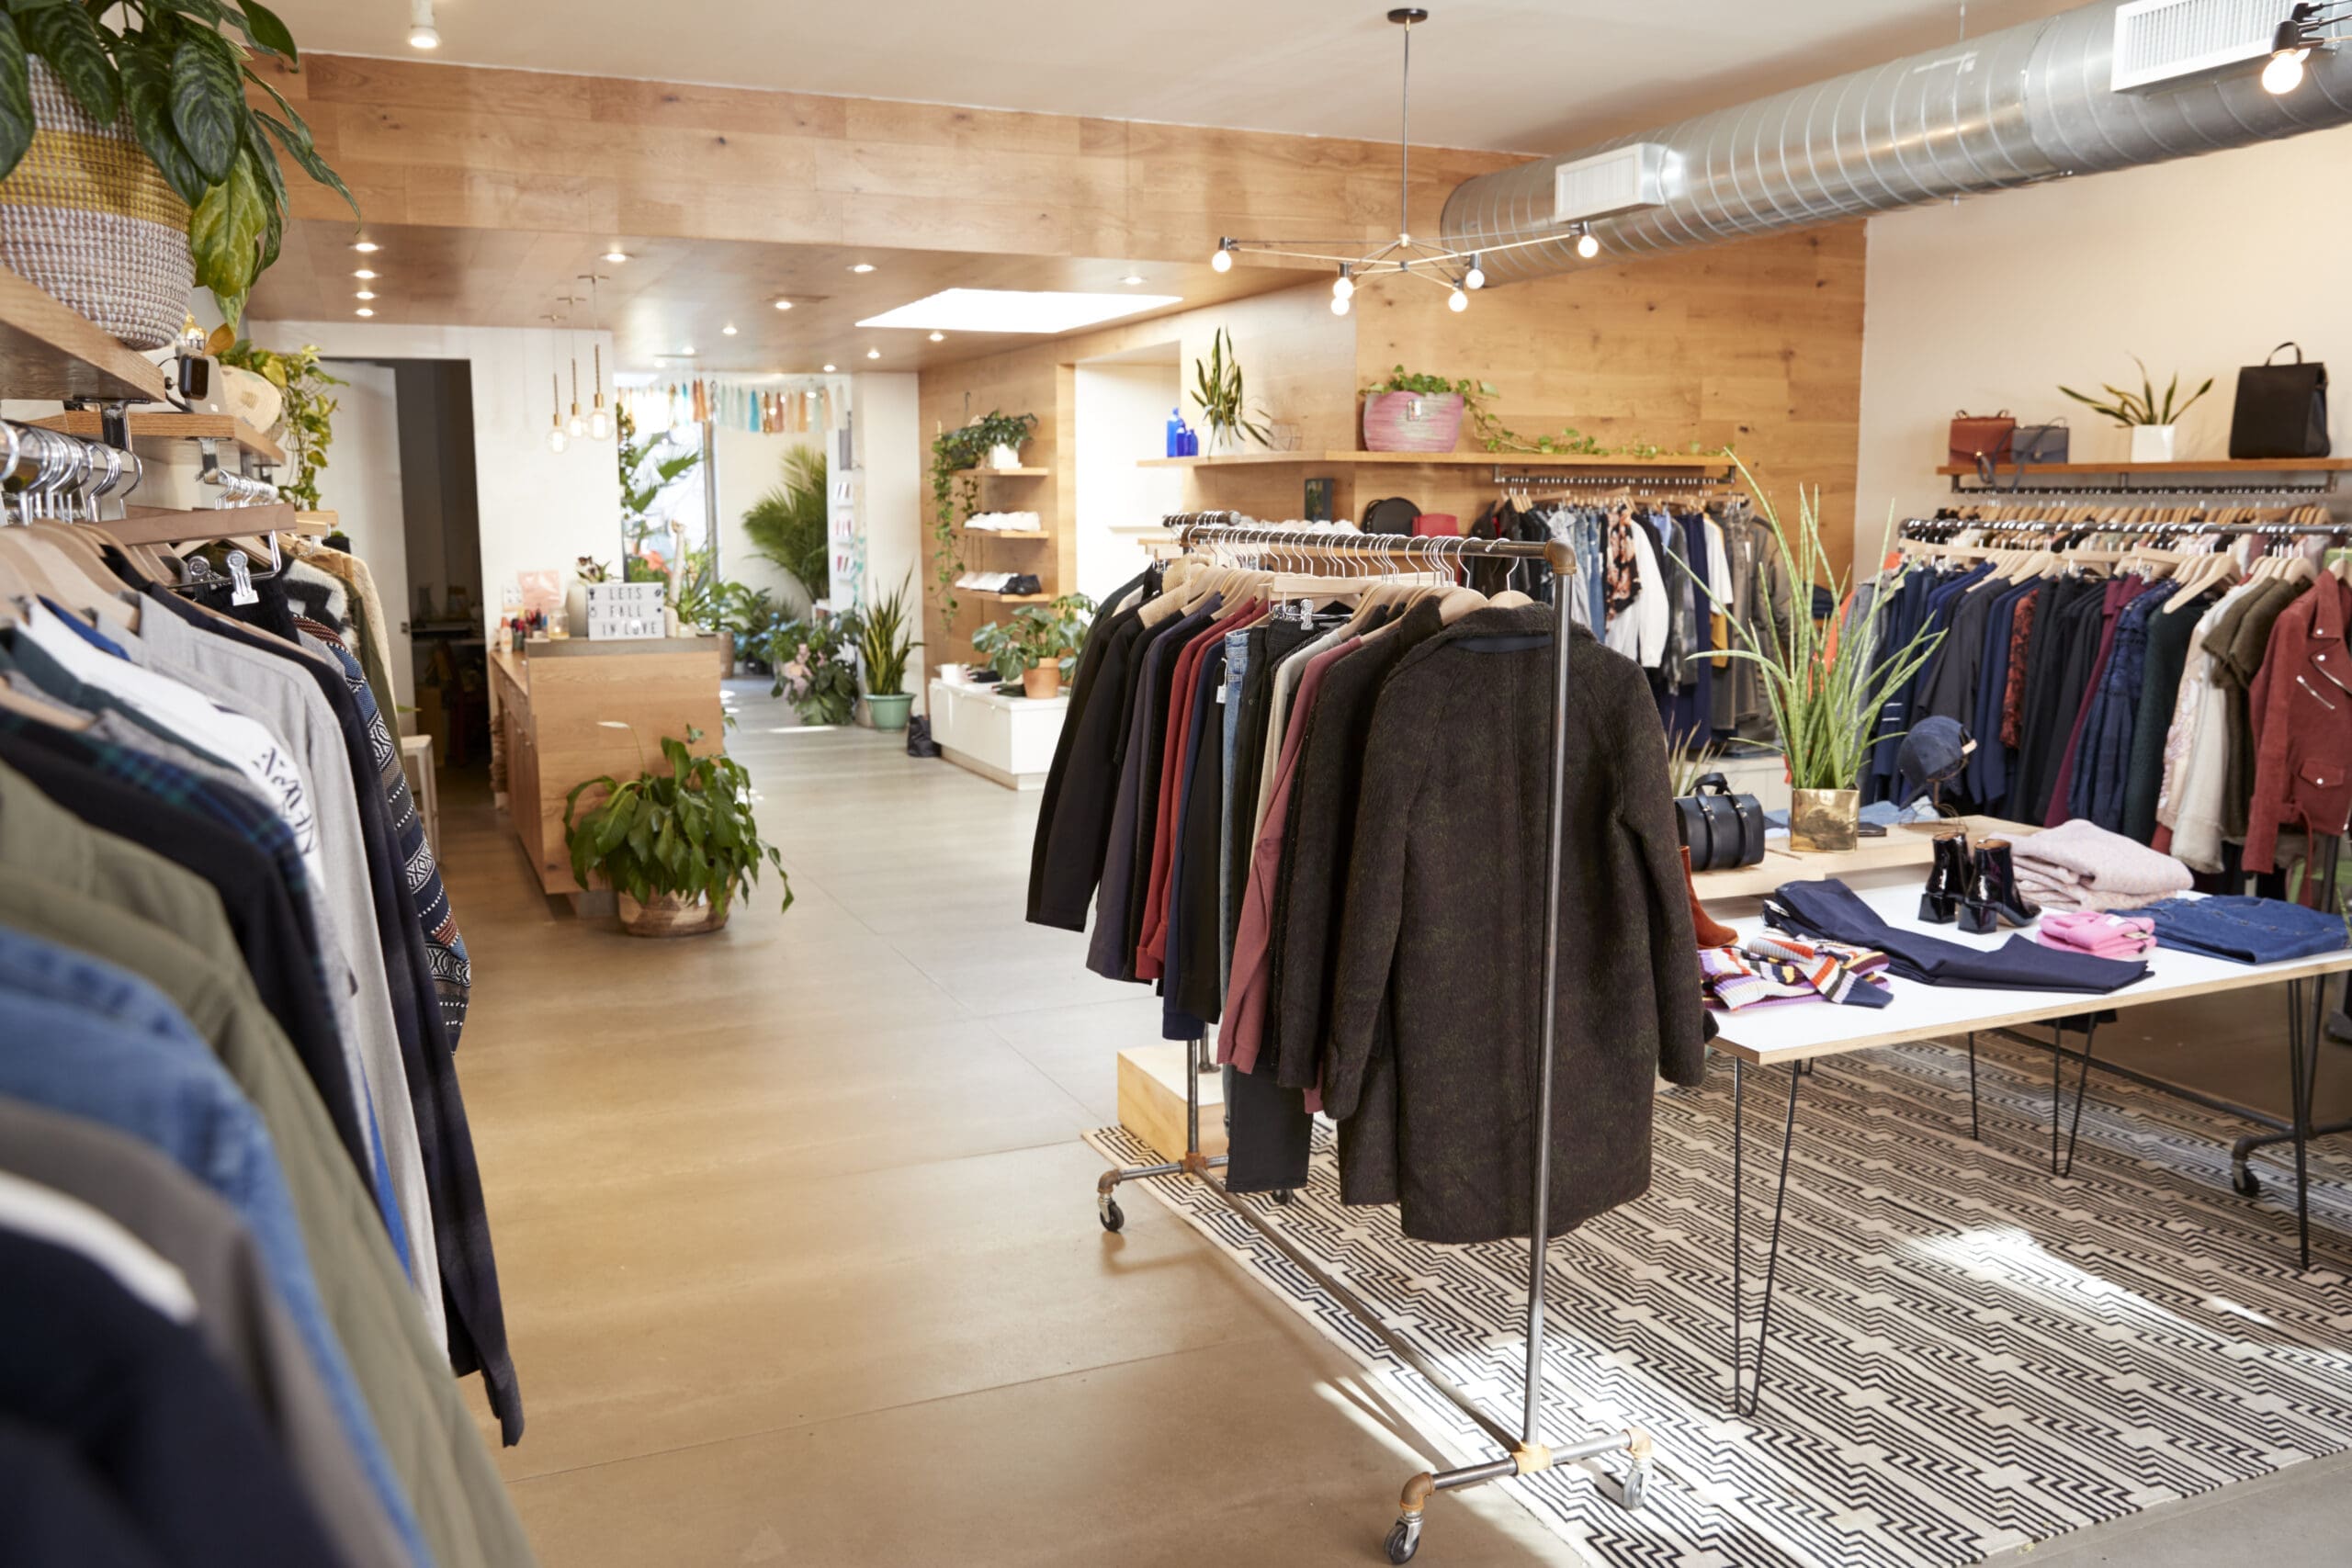 flow & visibility in retail spaces